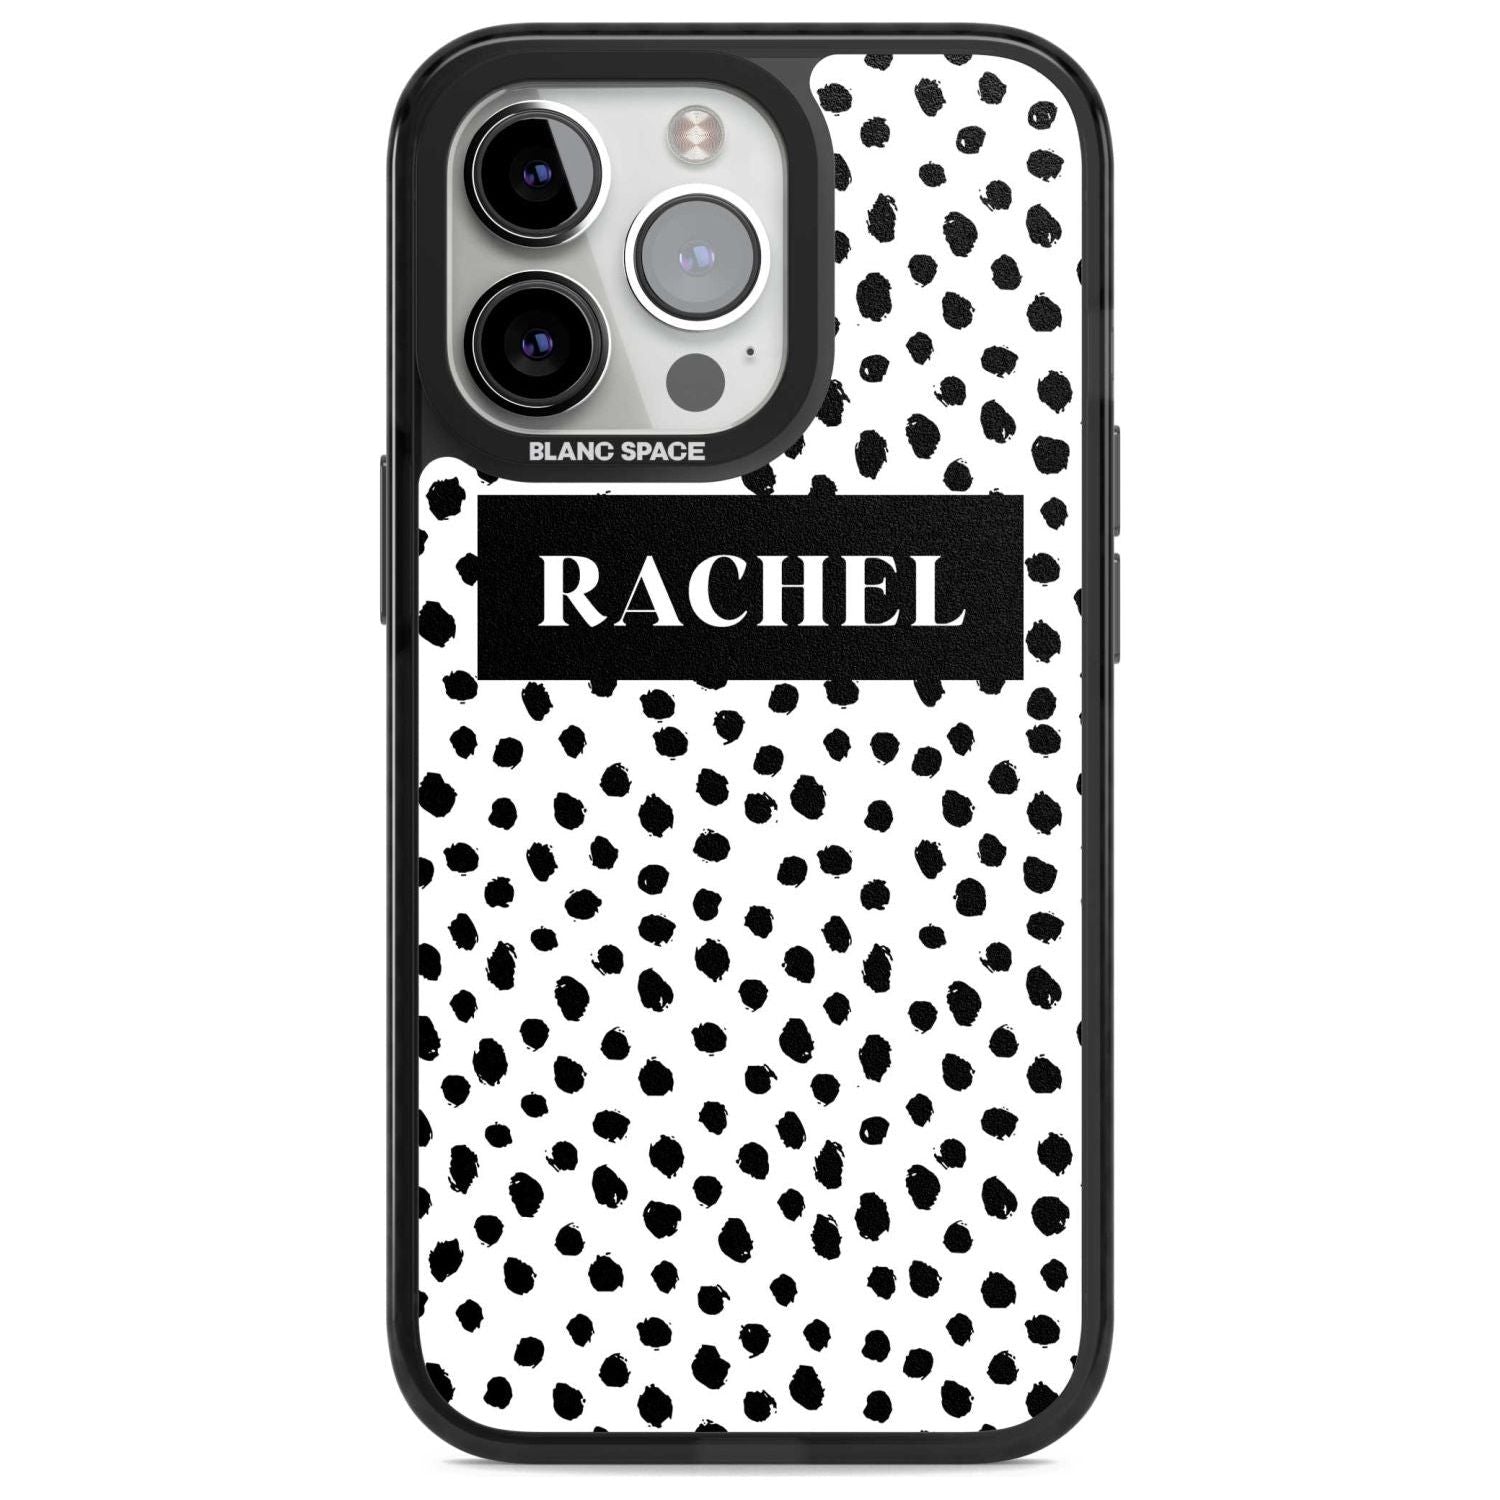 Personalised Black Bar & Dots Custom Phone Case iPhone 15 Pro Max / Magsafe Black Impact Case,iPhone 15 Pro / Magsafe Black Impact Case,iPhone 14 Pro Max / Magsafe Black Impact Case,iPhone 14 Pro / Magsafe Black Impact Case,iPhone 13 Pro / Magsafe Black Impact Case Blanc Space